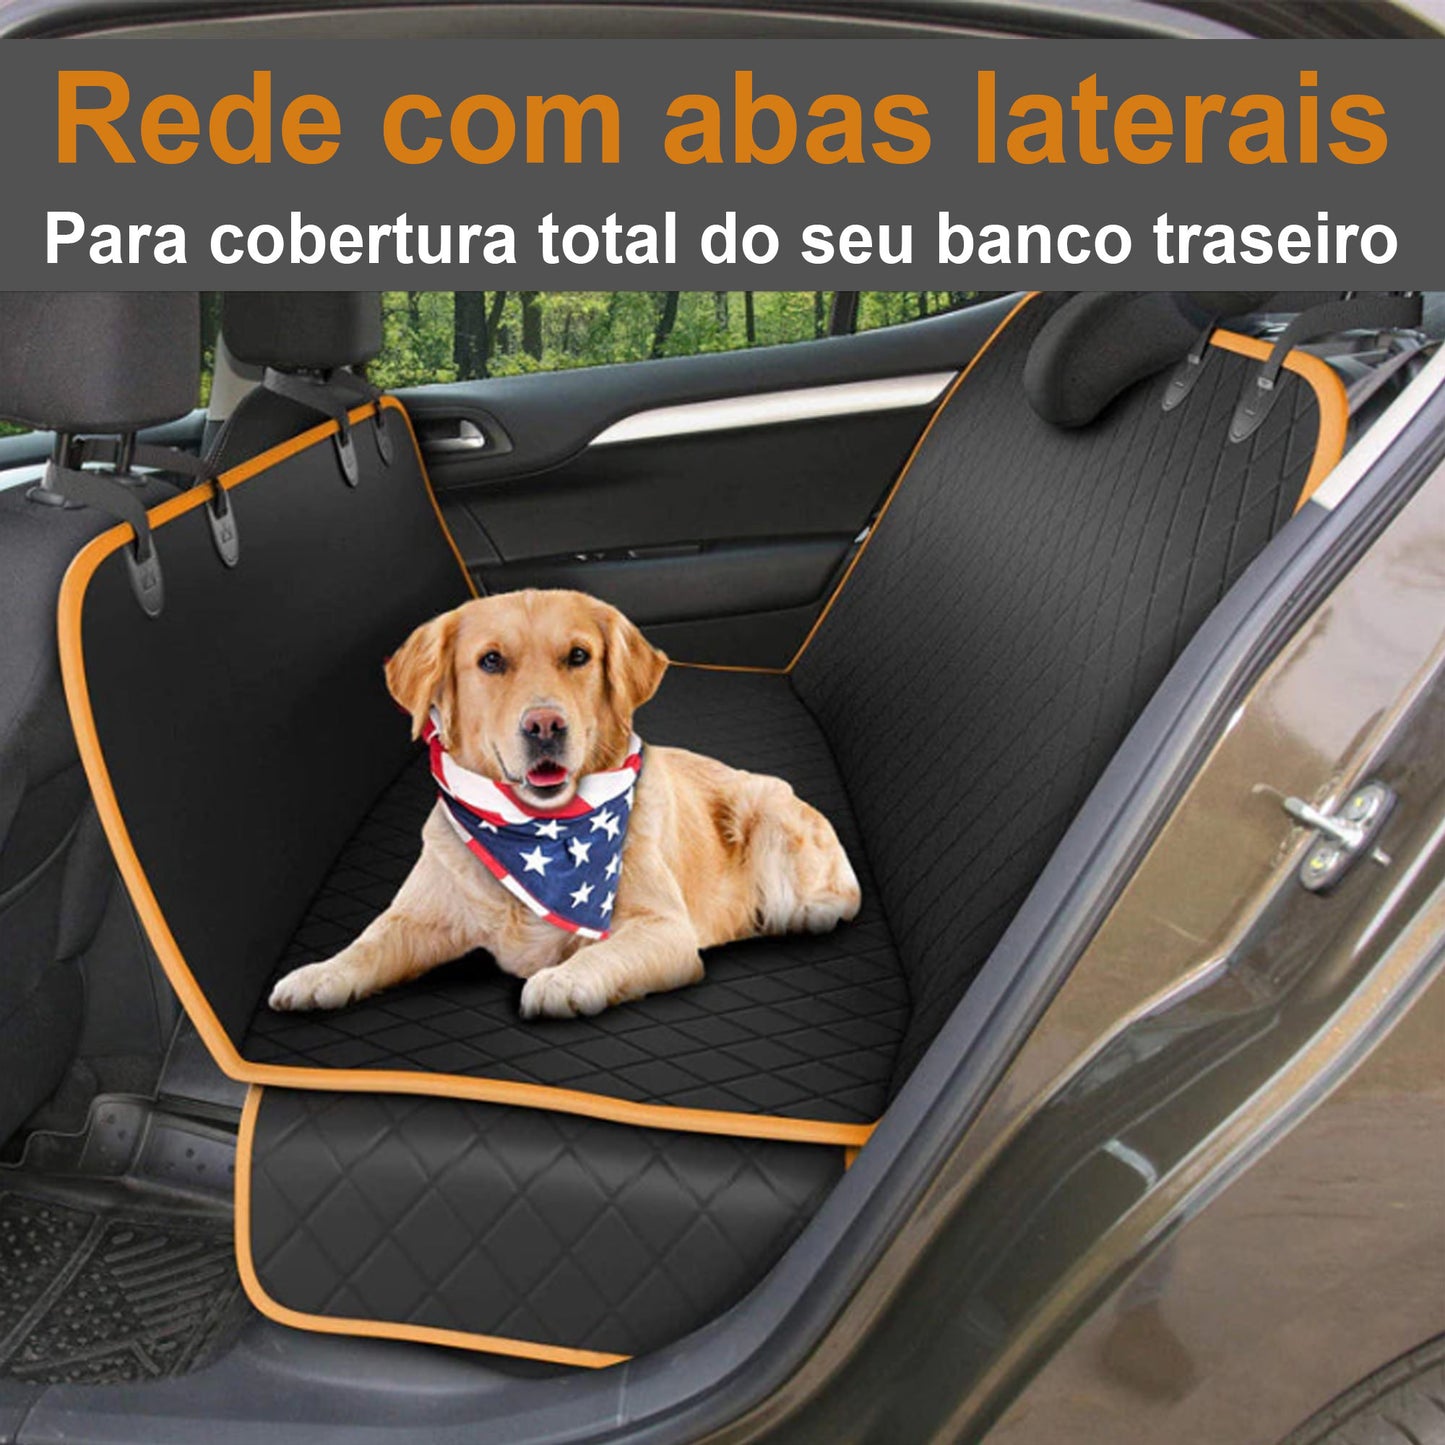 Car seat cover for pets